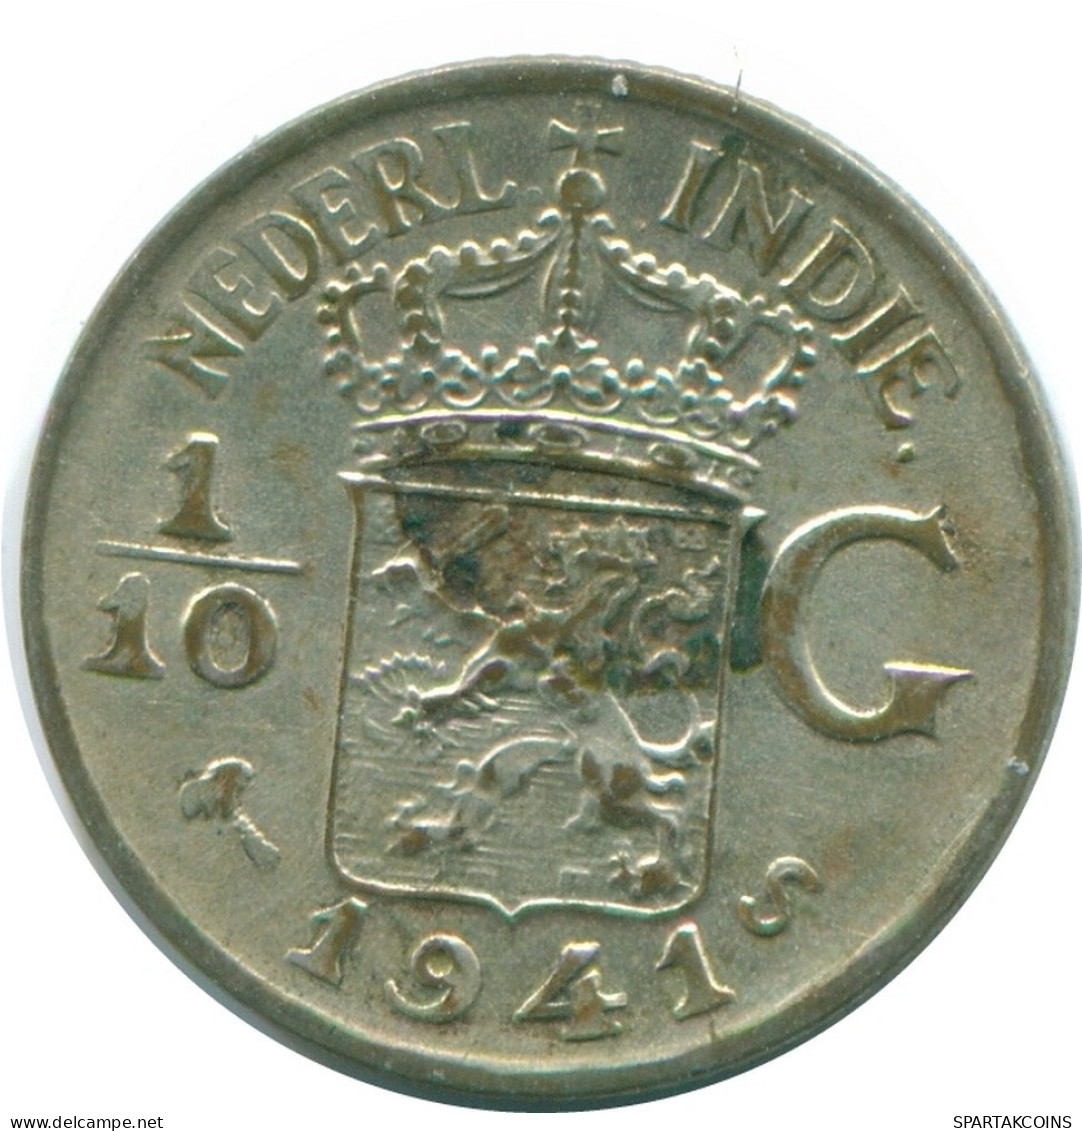 1/10 GULDEN 1941 S NETHERLANDS EAST INDIES SILVER Colonial Coin #NL13677.3.U.A - Dutch East Indies